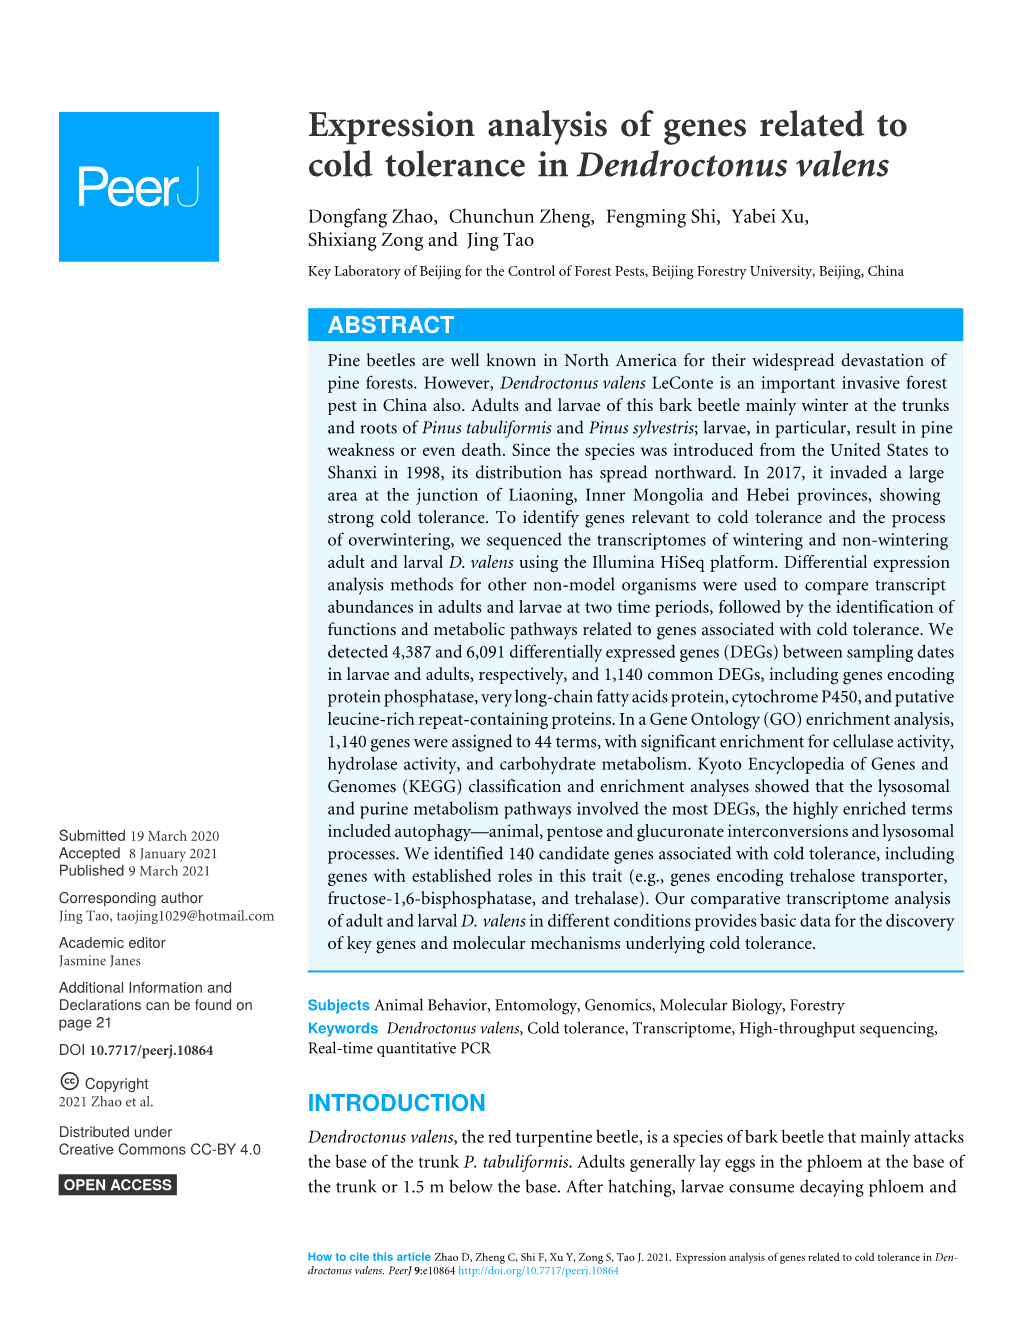 Expression Analysis of Genes Related to Cold Tolerance in Dendroctonus Valens